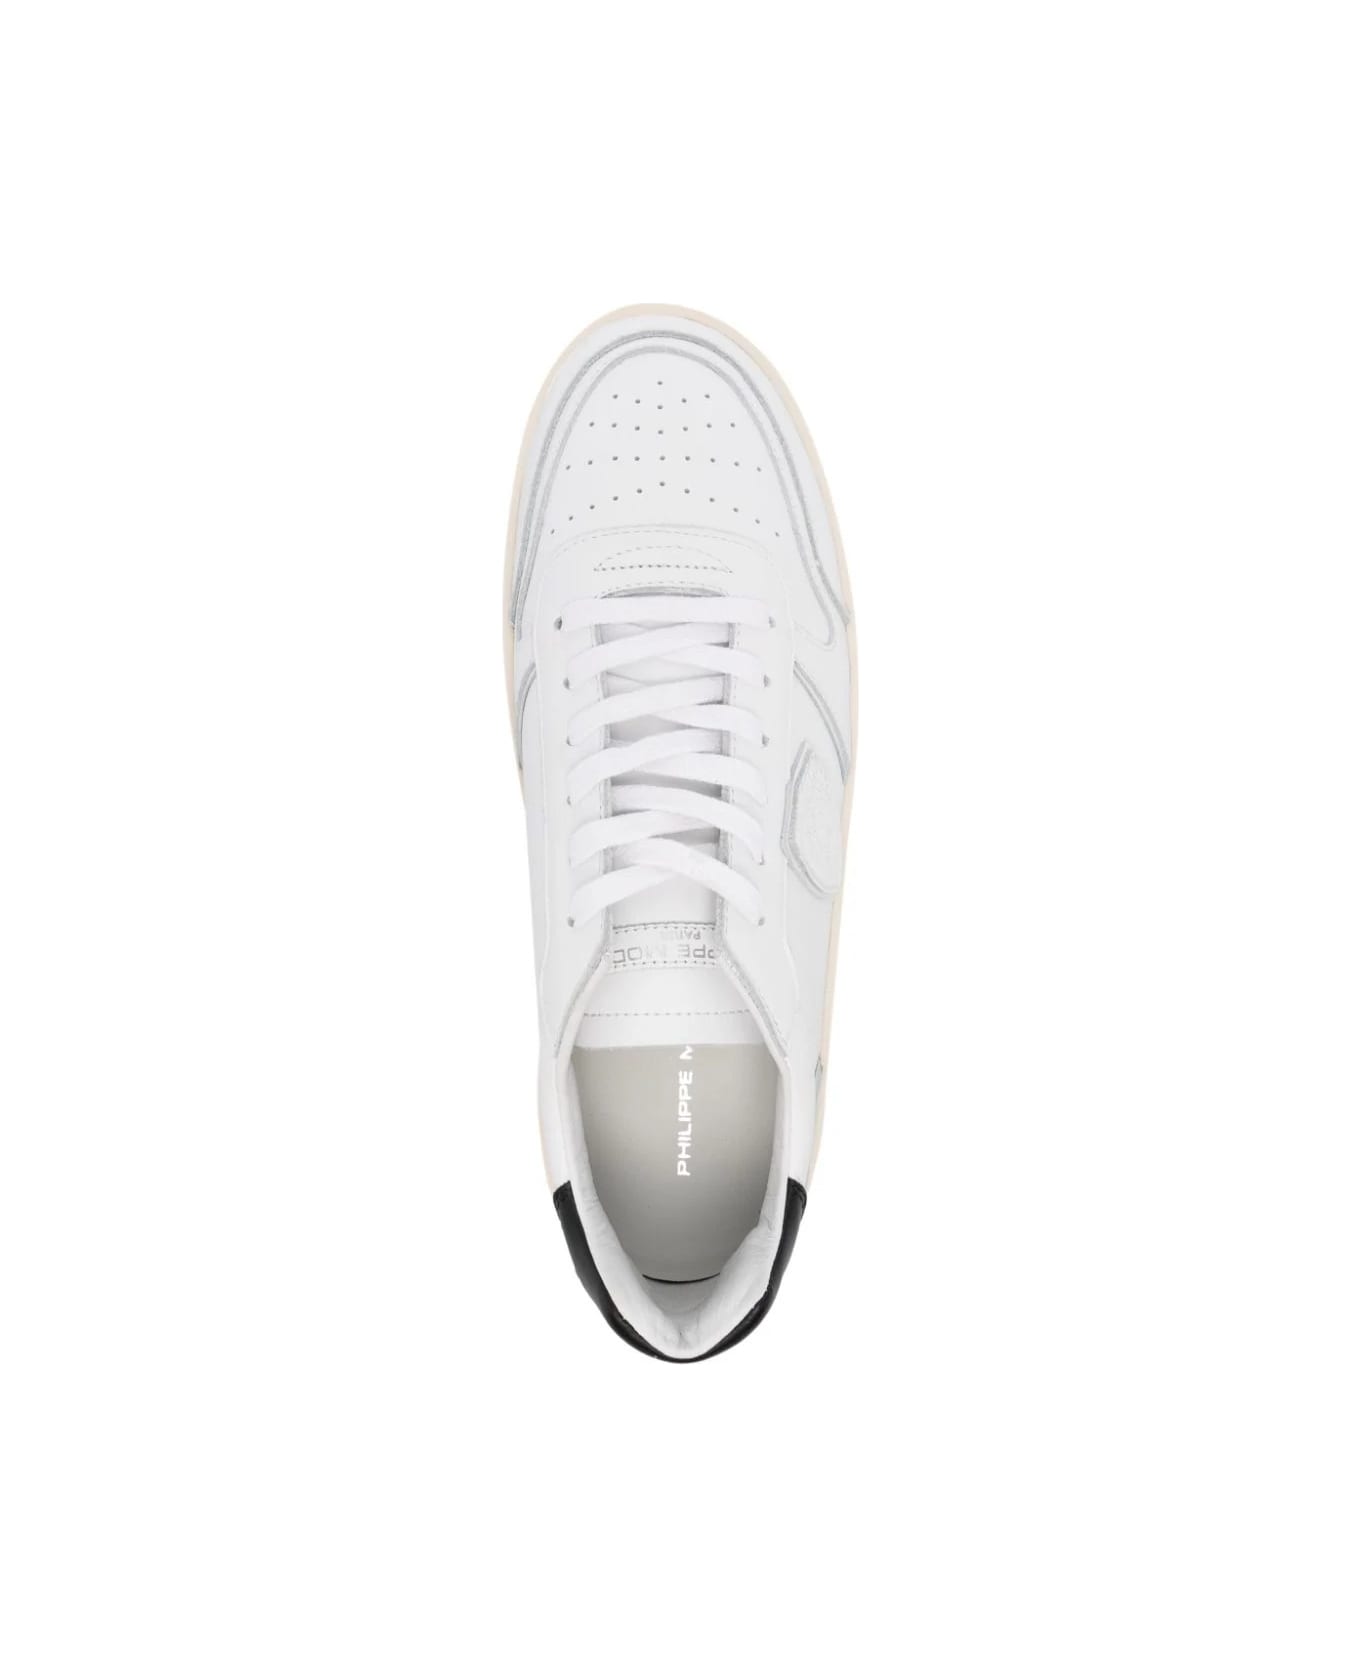 Philippe Model Nice Low Sneakers - White And Black - White スニーカー